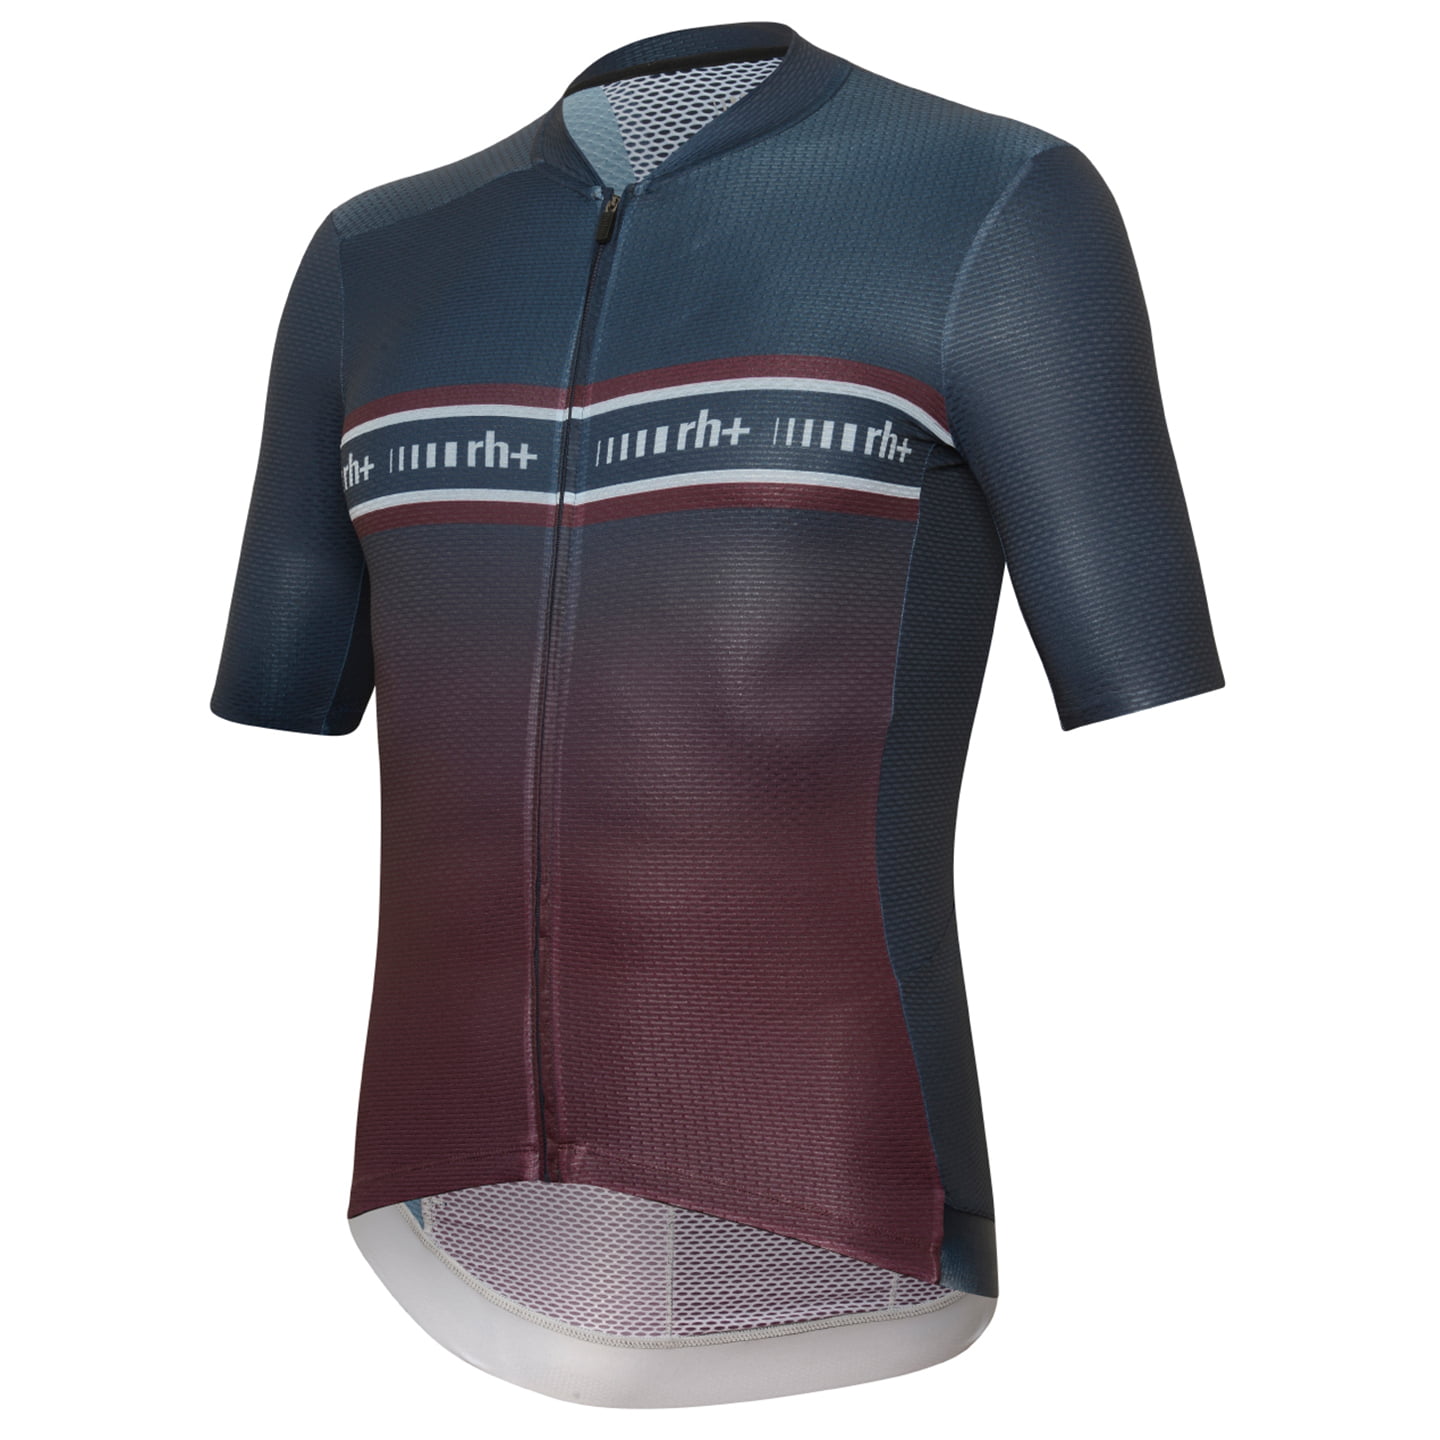 RH+ Light Climber Short Sleeve Jersey Short Sleeve Jersey, for men, size XL, Cycling jersey, Cycle clothing